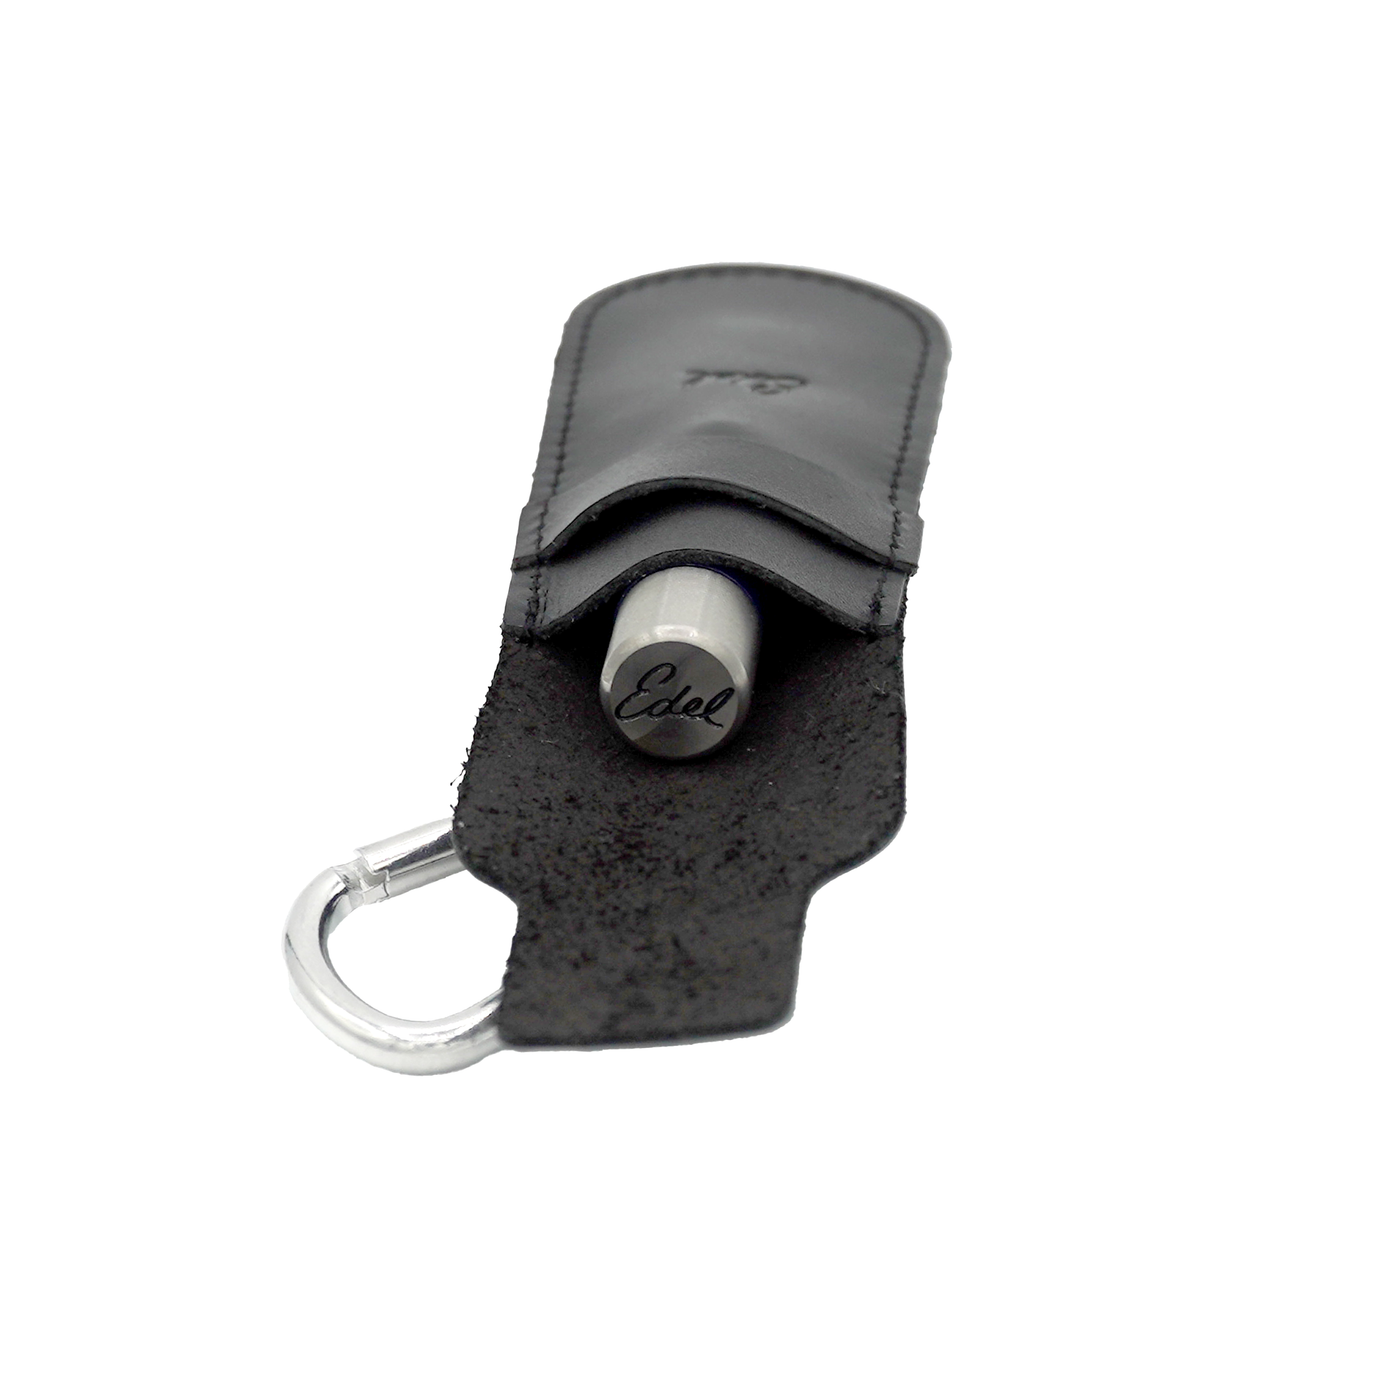 Edel Repair Tool featuring a black and silver ferrule in a leather sleeve